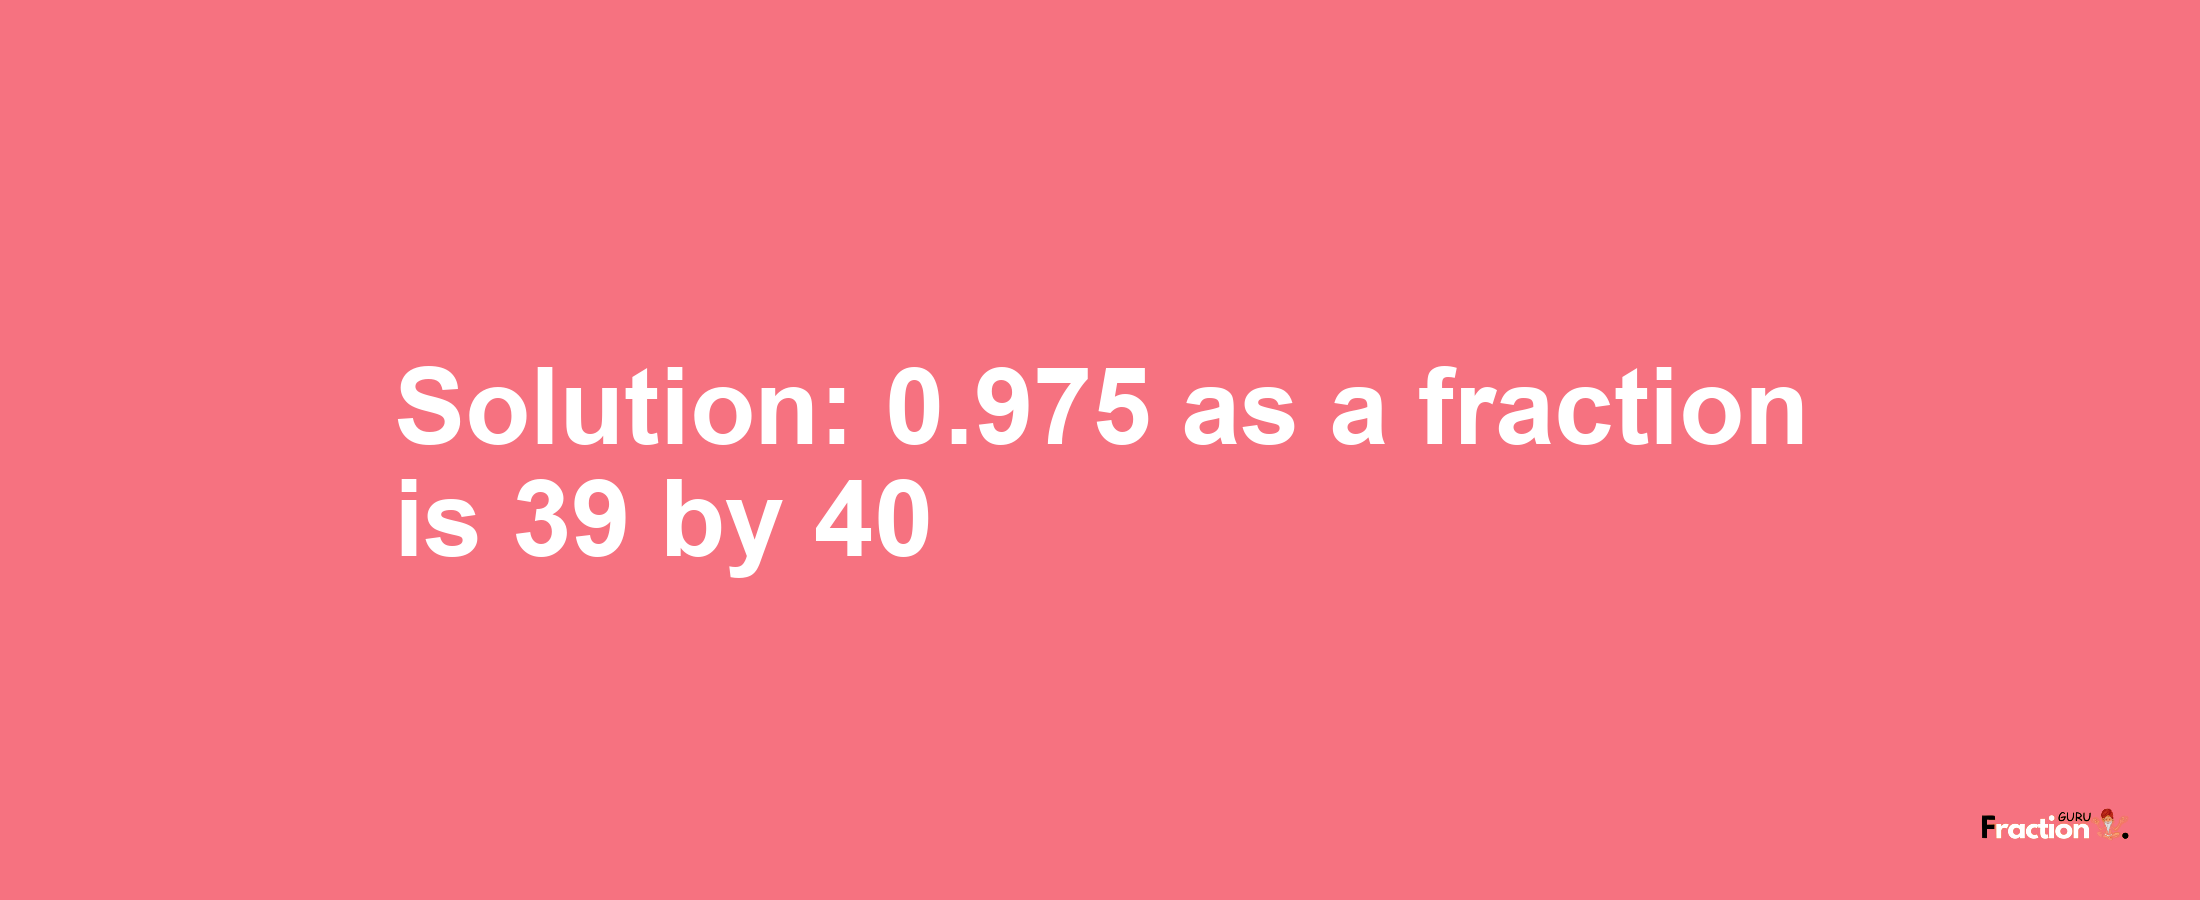 Solution:0.975 as a fraction is 39/40